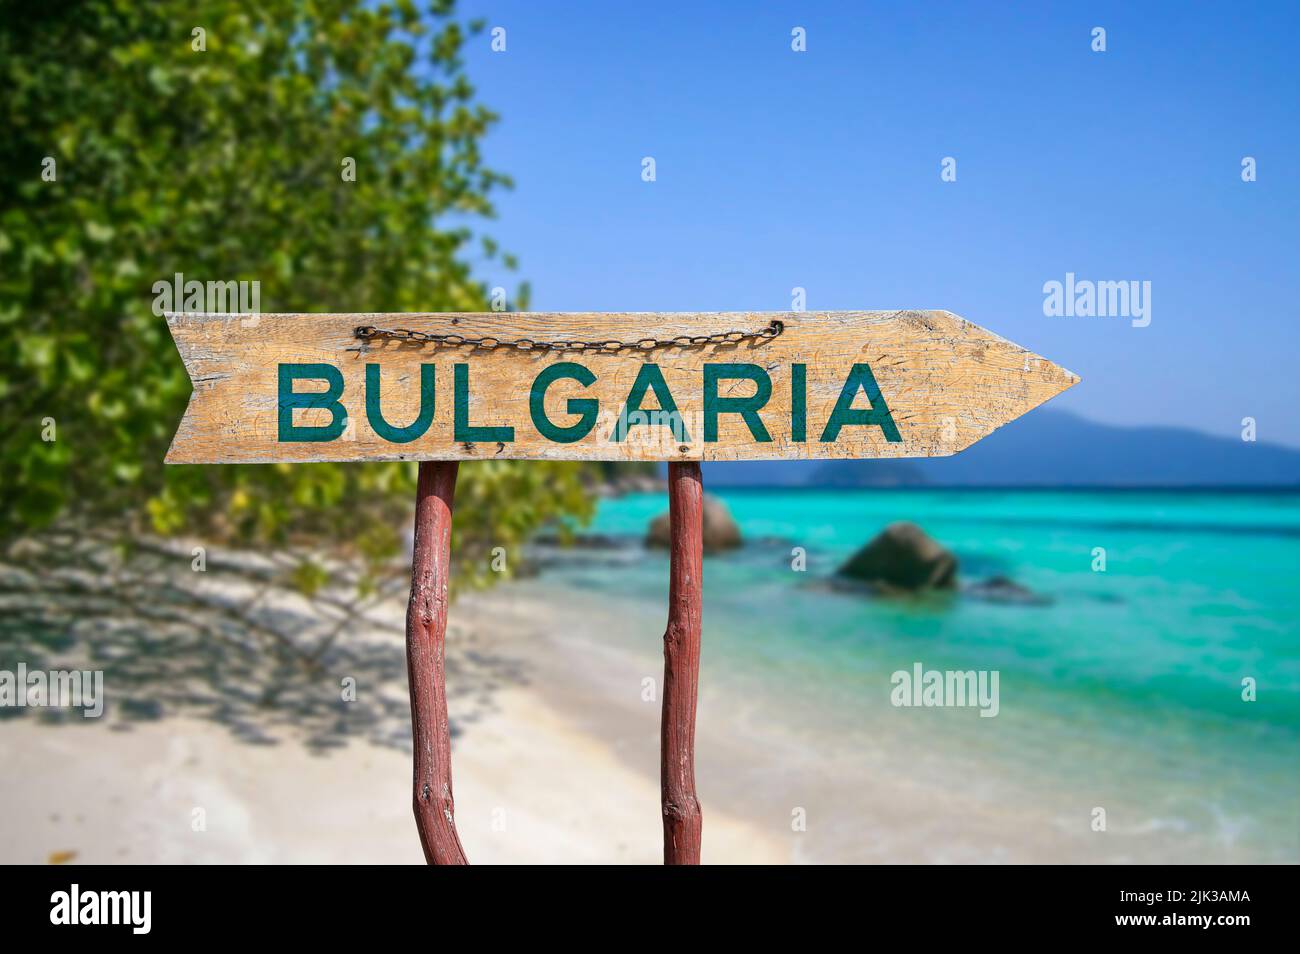 Bulgaria wooden arrow road sign against beach with white sand and turquoise water background. Travel to Bulgaria concept. Stock Photo